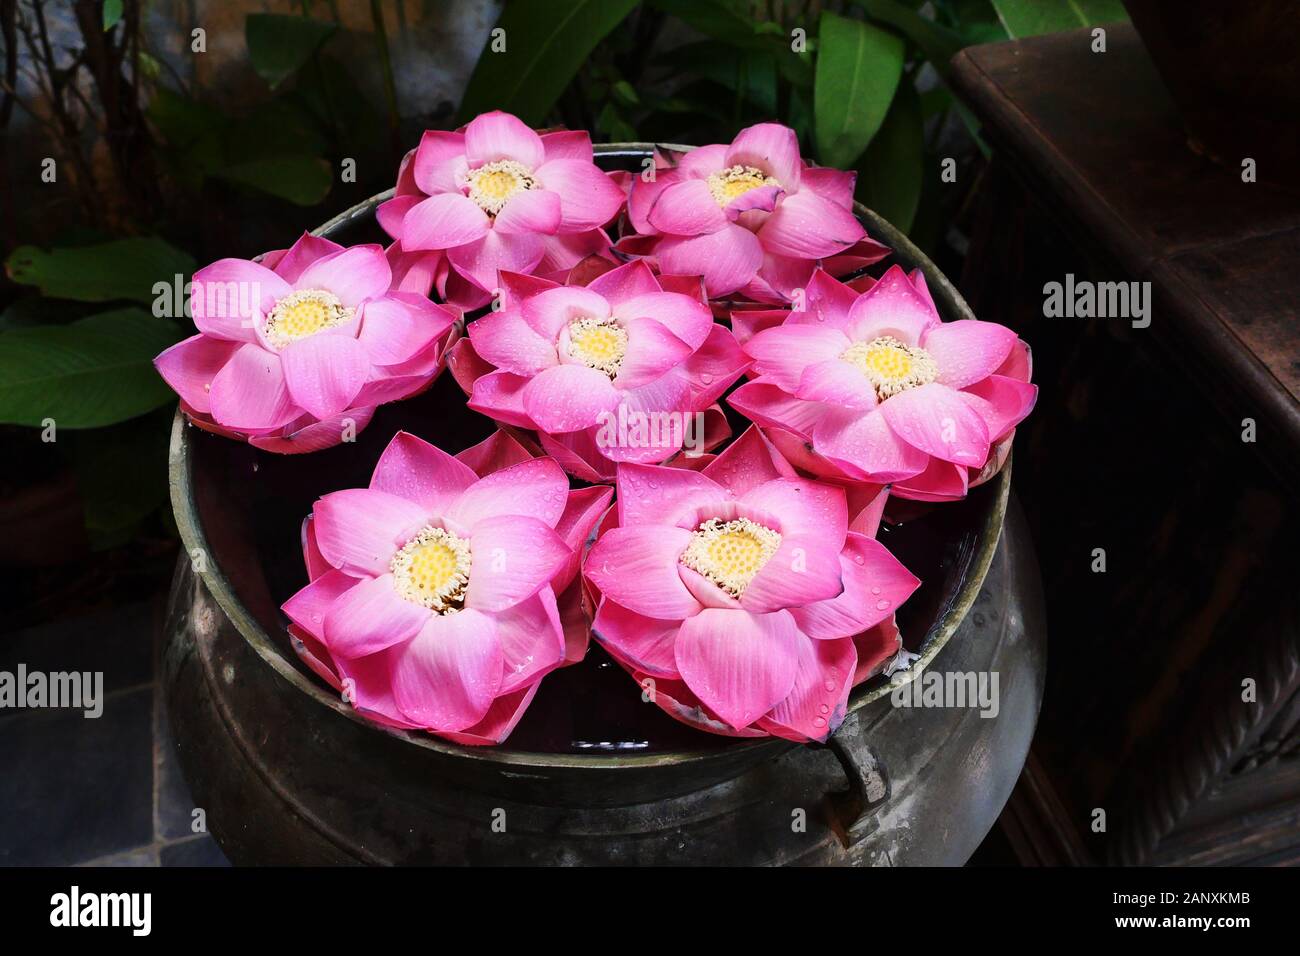 Bean of India or Sacred Lotus flower petals were folded into the shape of a pink rose blossom on the water in dark brown basin, Tropical Water Lilly Stock Photo